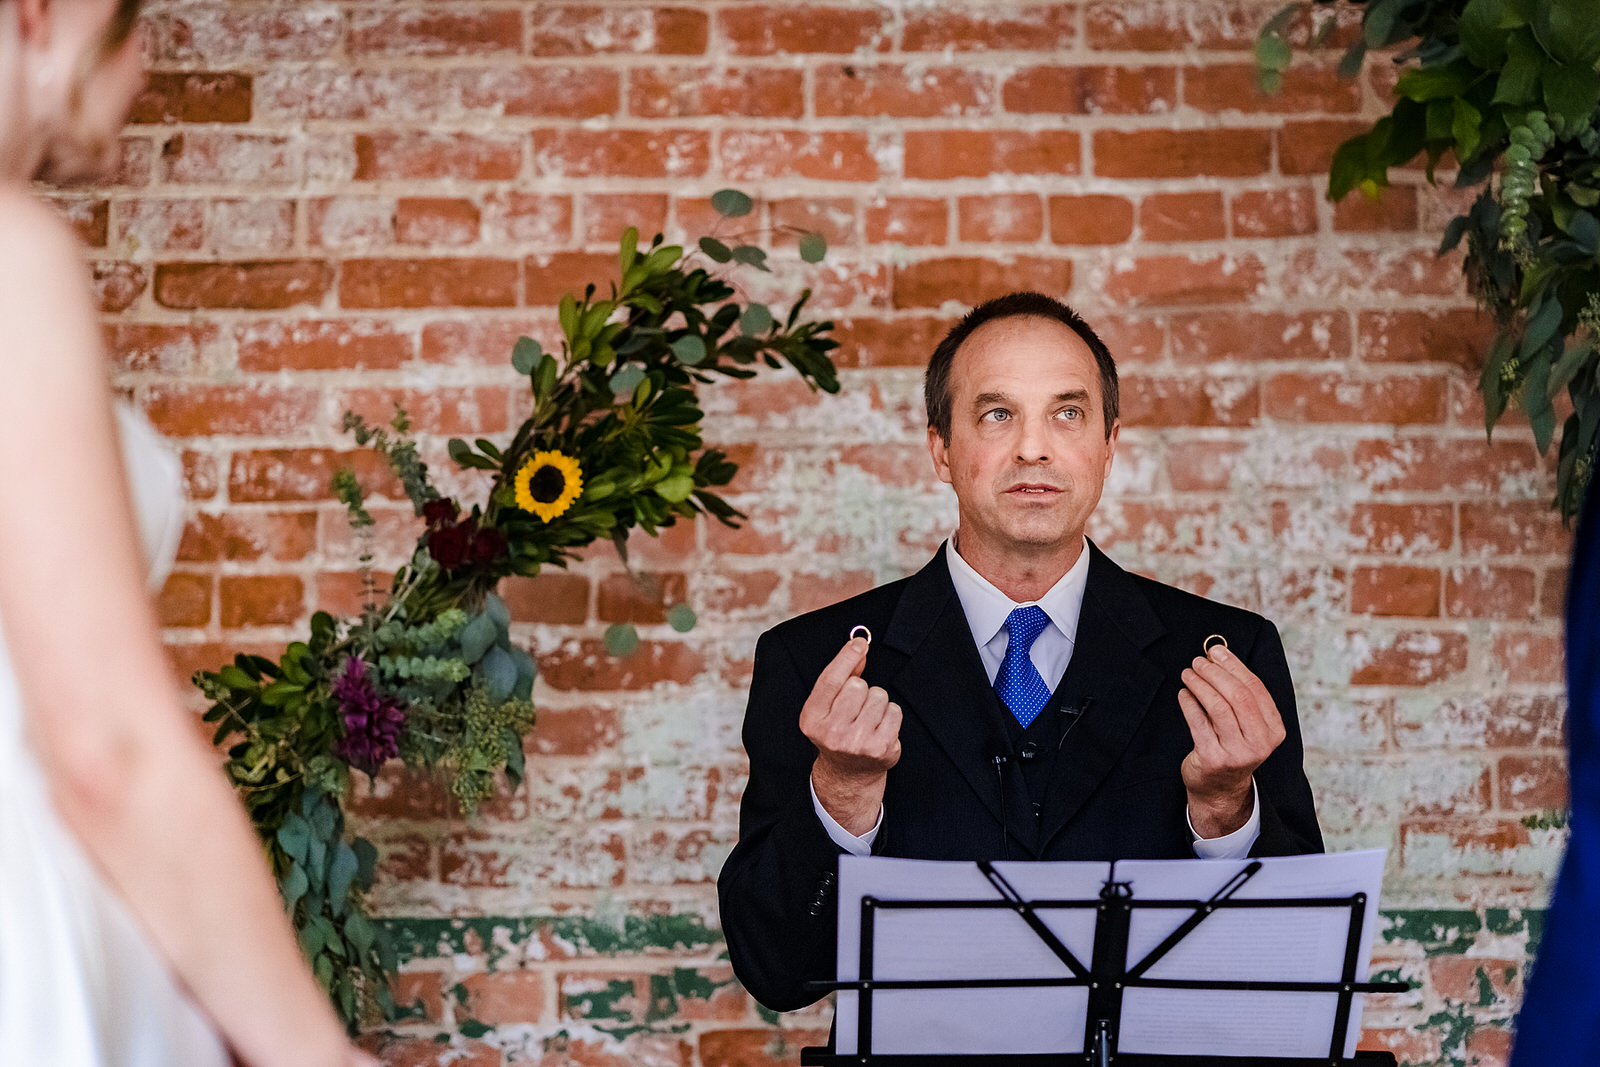 Officiant holds up wedding rings - what do you want your rings to symbolize?